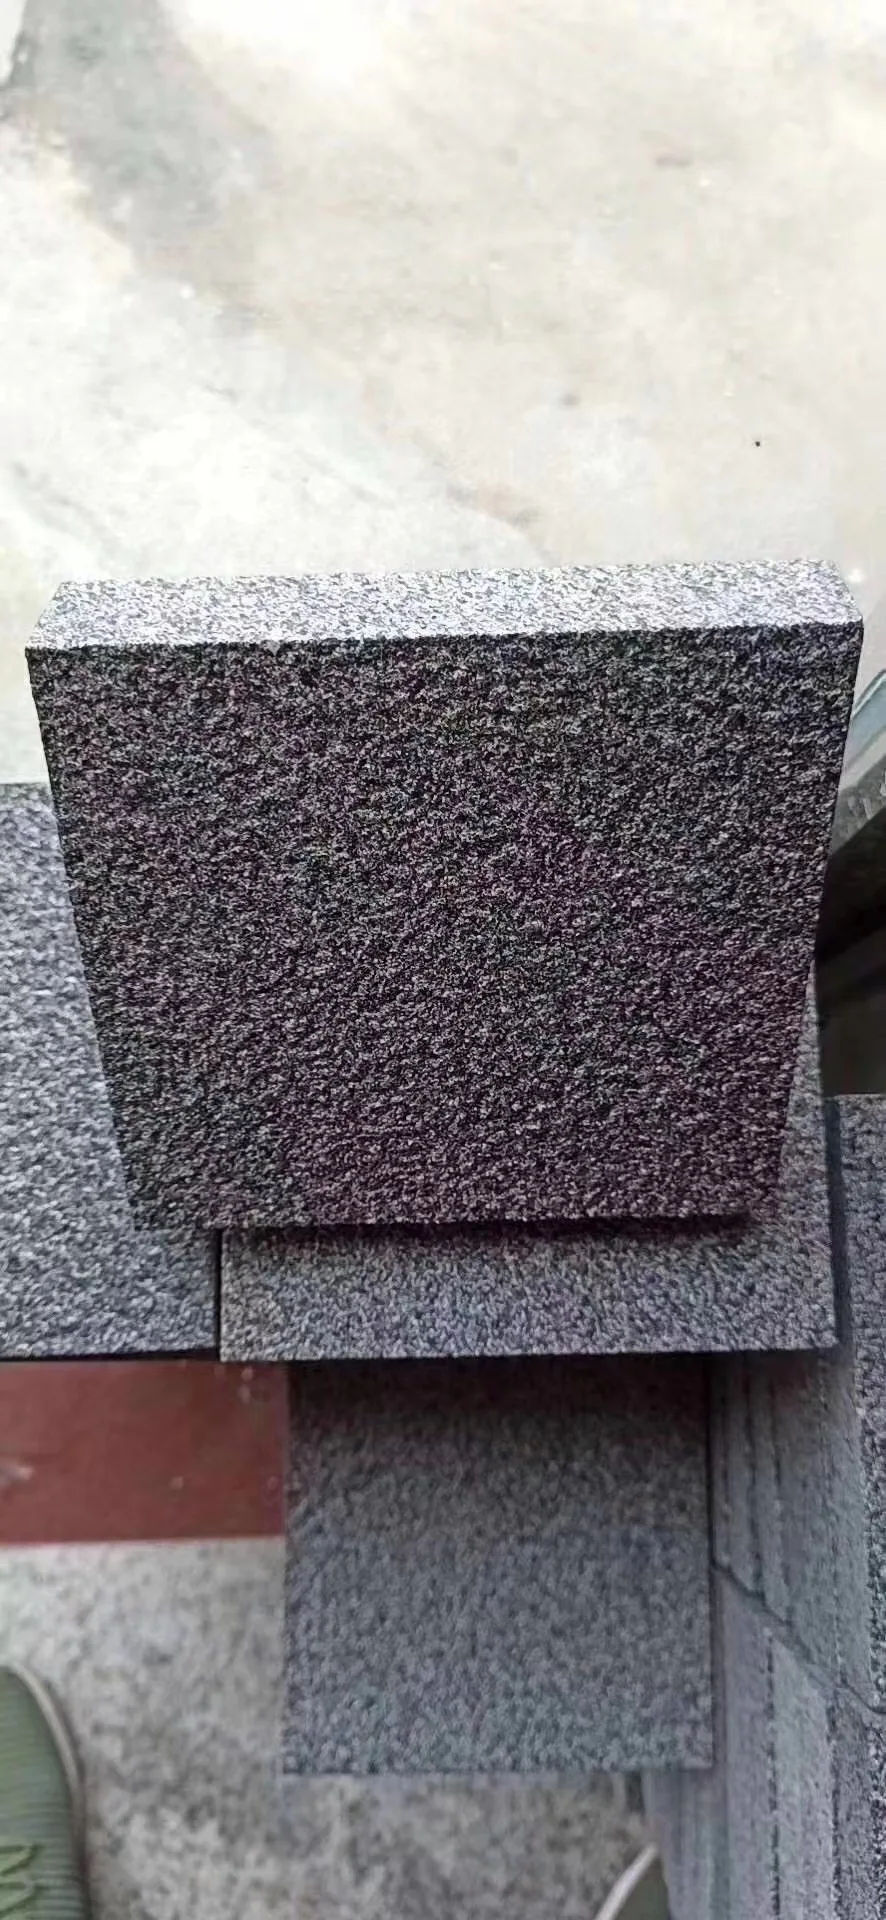 All Color Available Cheap Swimming Pool Border Stone G654 Granite Swimming Pool Edge Tile For Sale